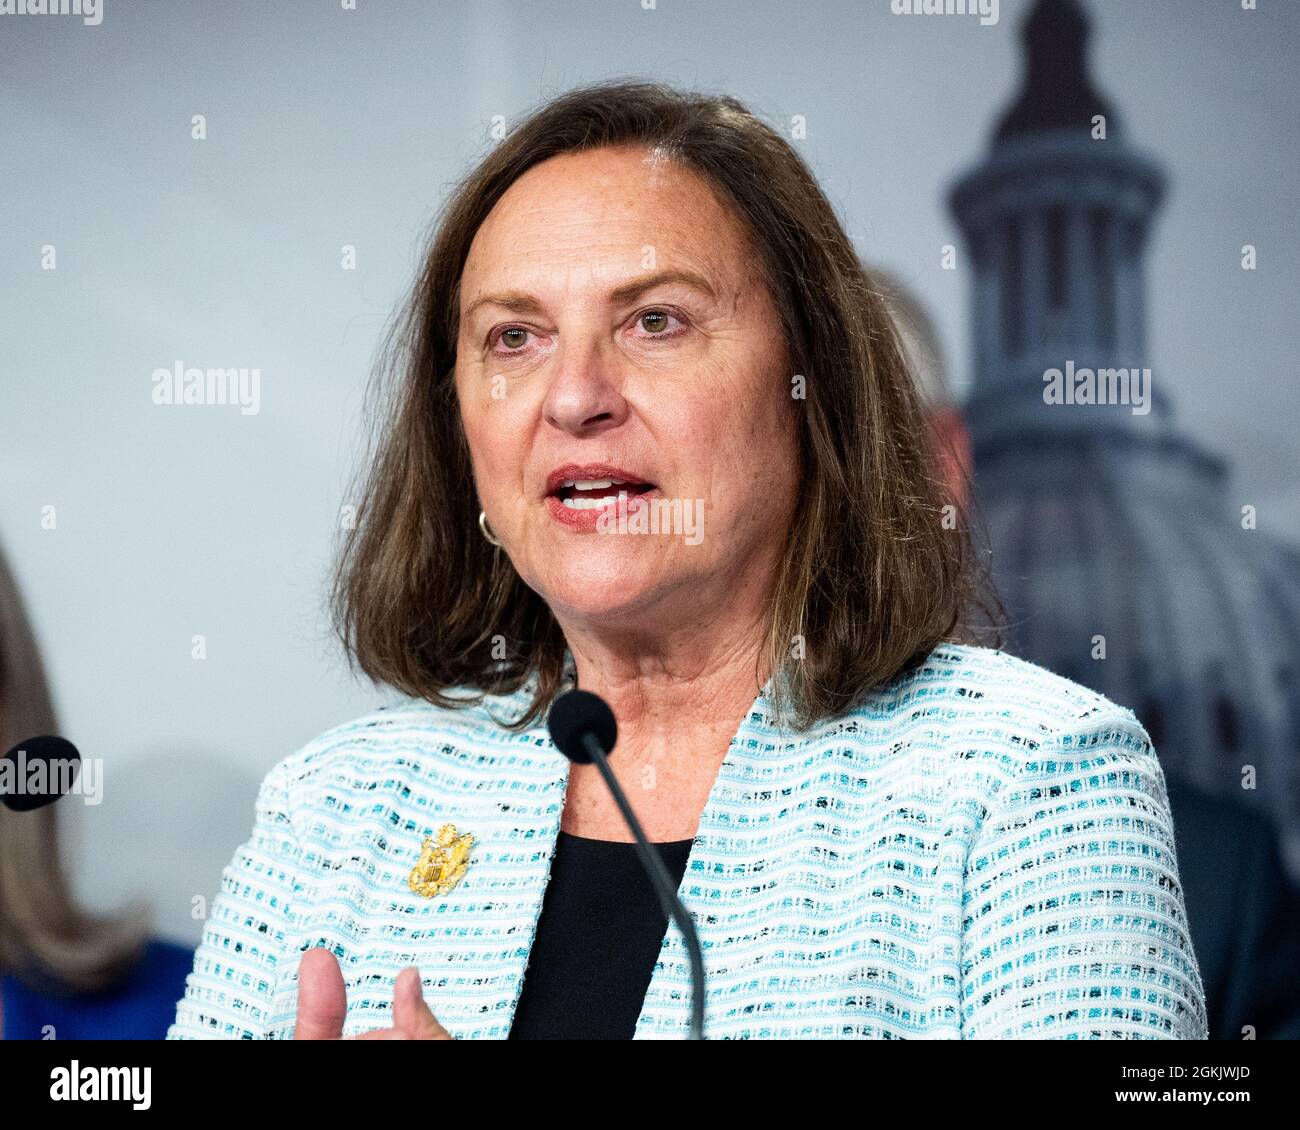 Washington, United States. 14th Sep, 2021. U.S. Senator Deb Fischer (R-NE) speaks at a press conference where Republican members of the Senate Armed Services Committee talked about the withdrawal from Afghanistan. Credit: SOPA Images Limited/Alamy Live News Stock Photo